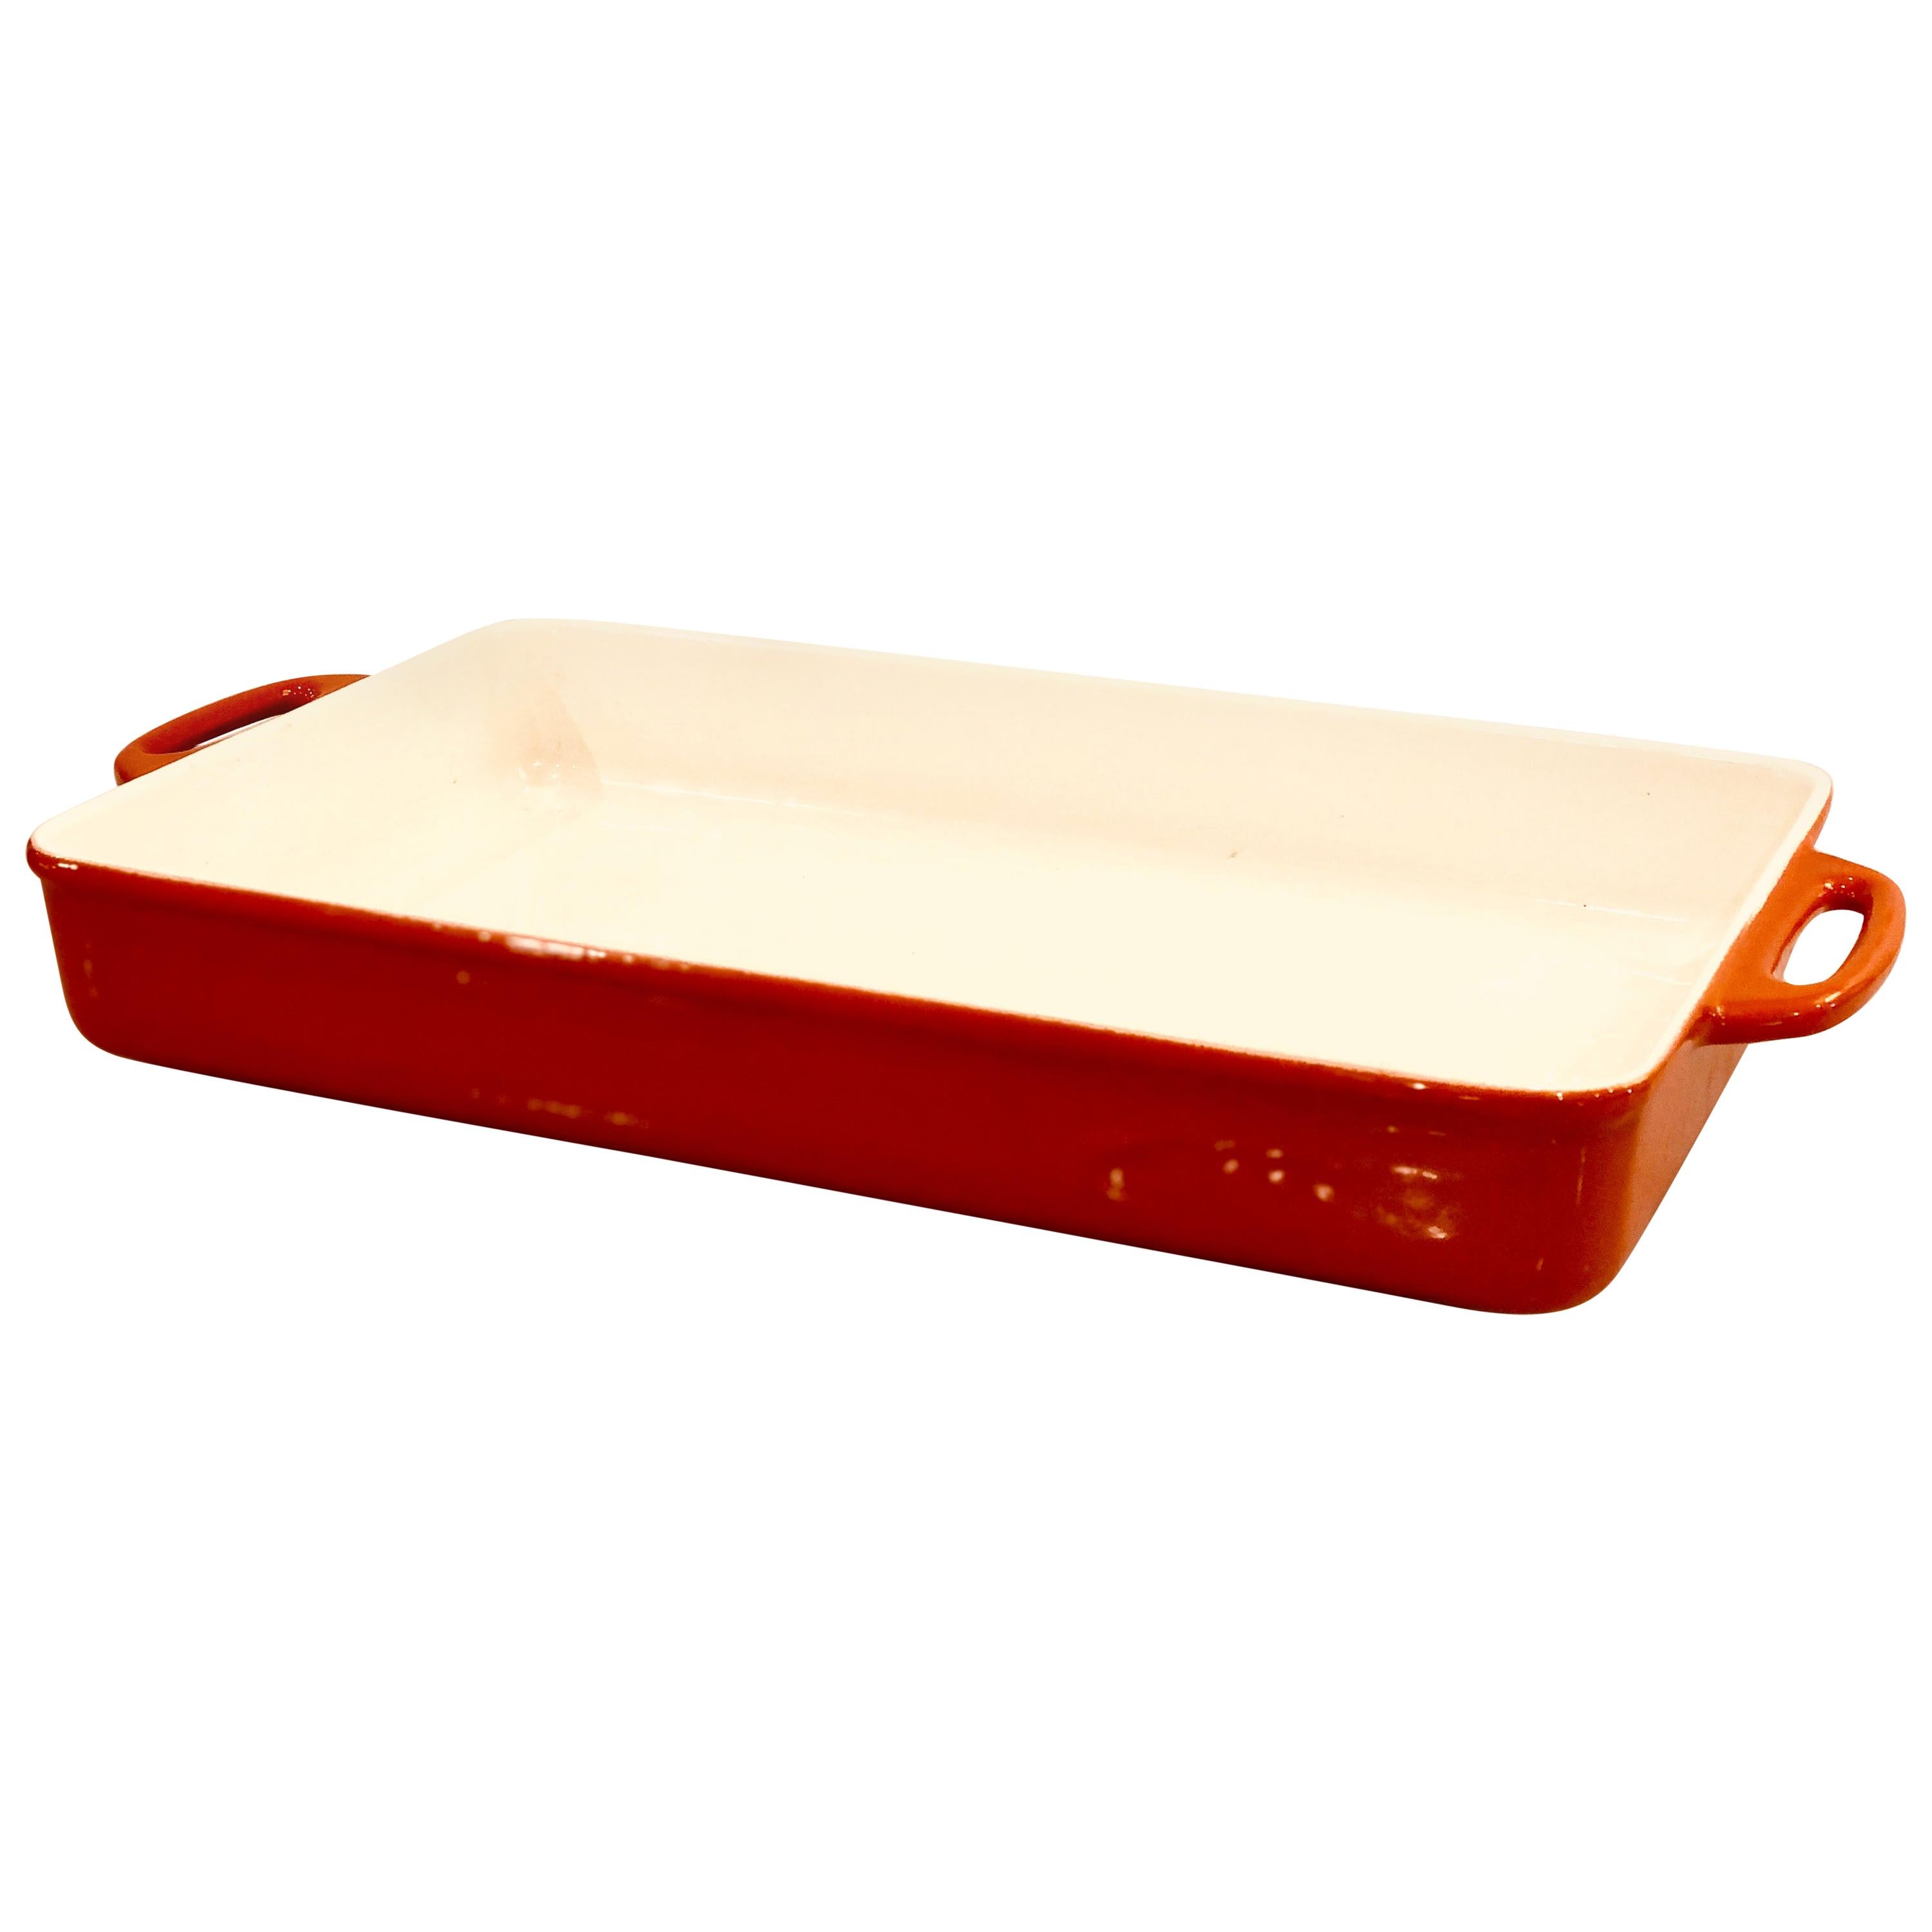 https://a.1stdibscdn.com/orange-enameled-cookware-casserole-by-copco-designed-by-michael-lax-for-sale/1121189/f_177595721580459106521/17759572_master.jpeg